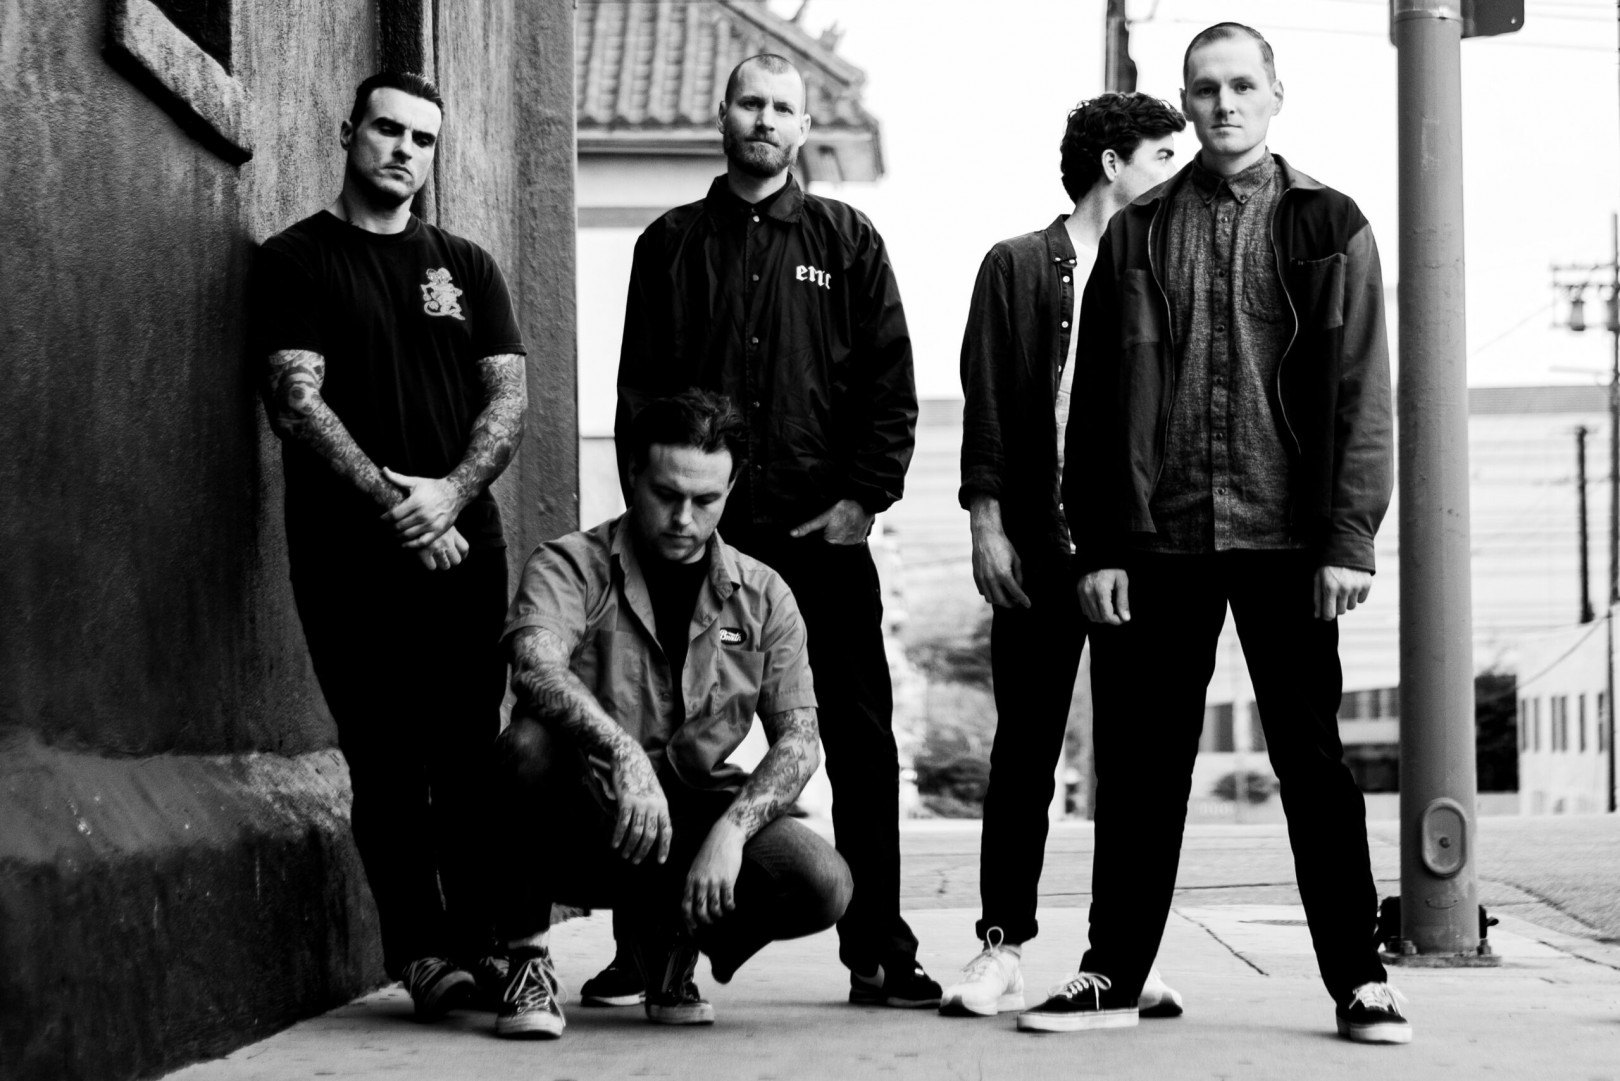 Stick to Your Guns: "Open Up My Head"